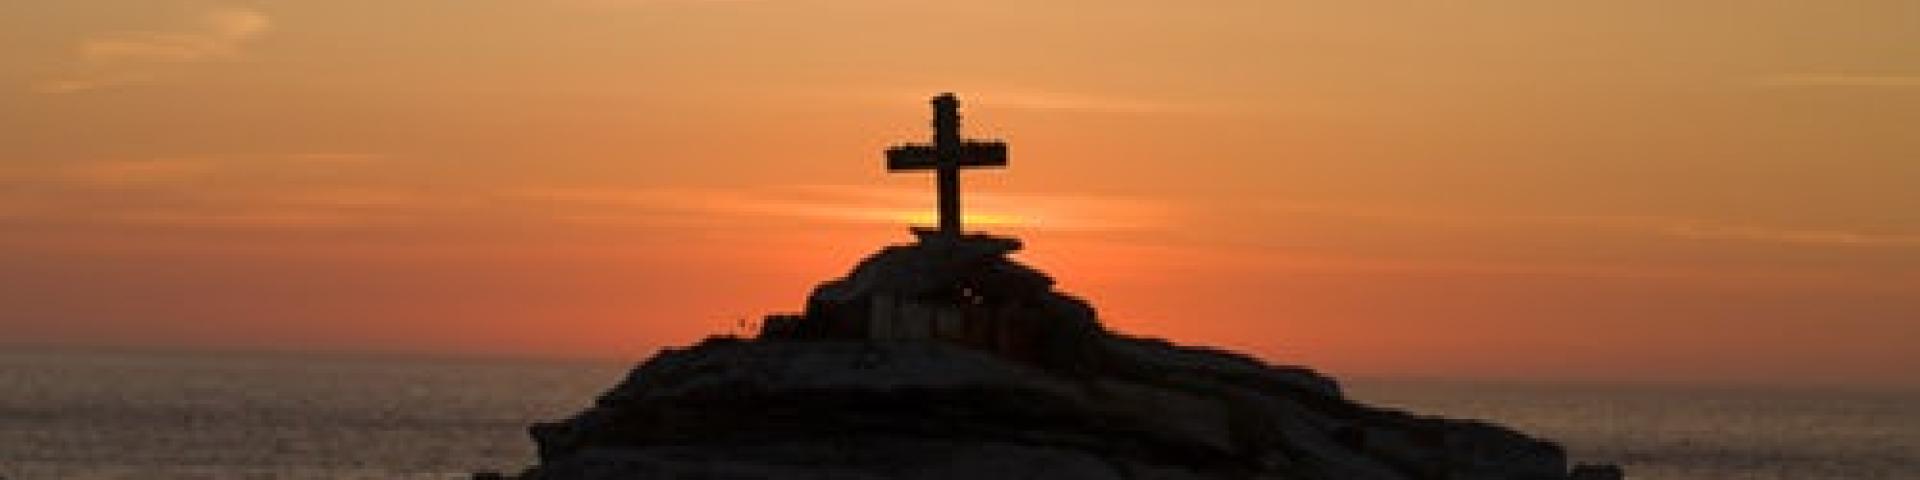 Cross on a hill with a sunset in the background